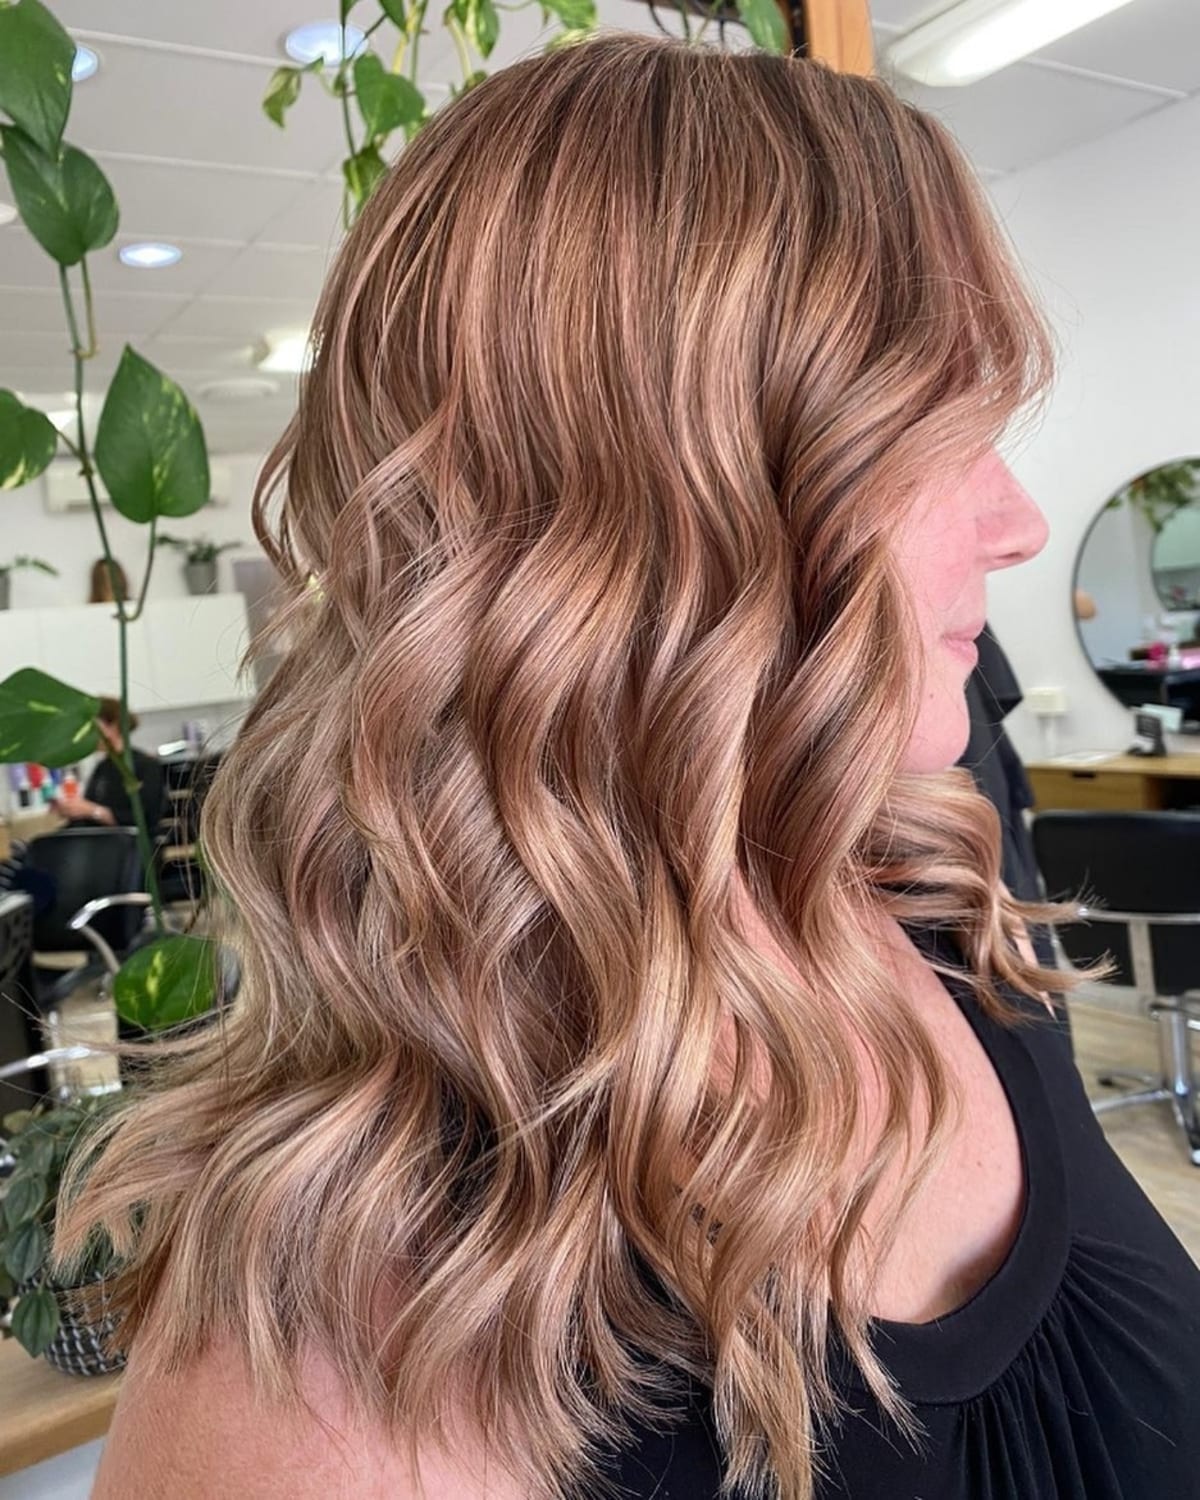 Light brown hair with bronze highlights